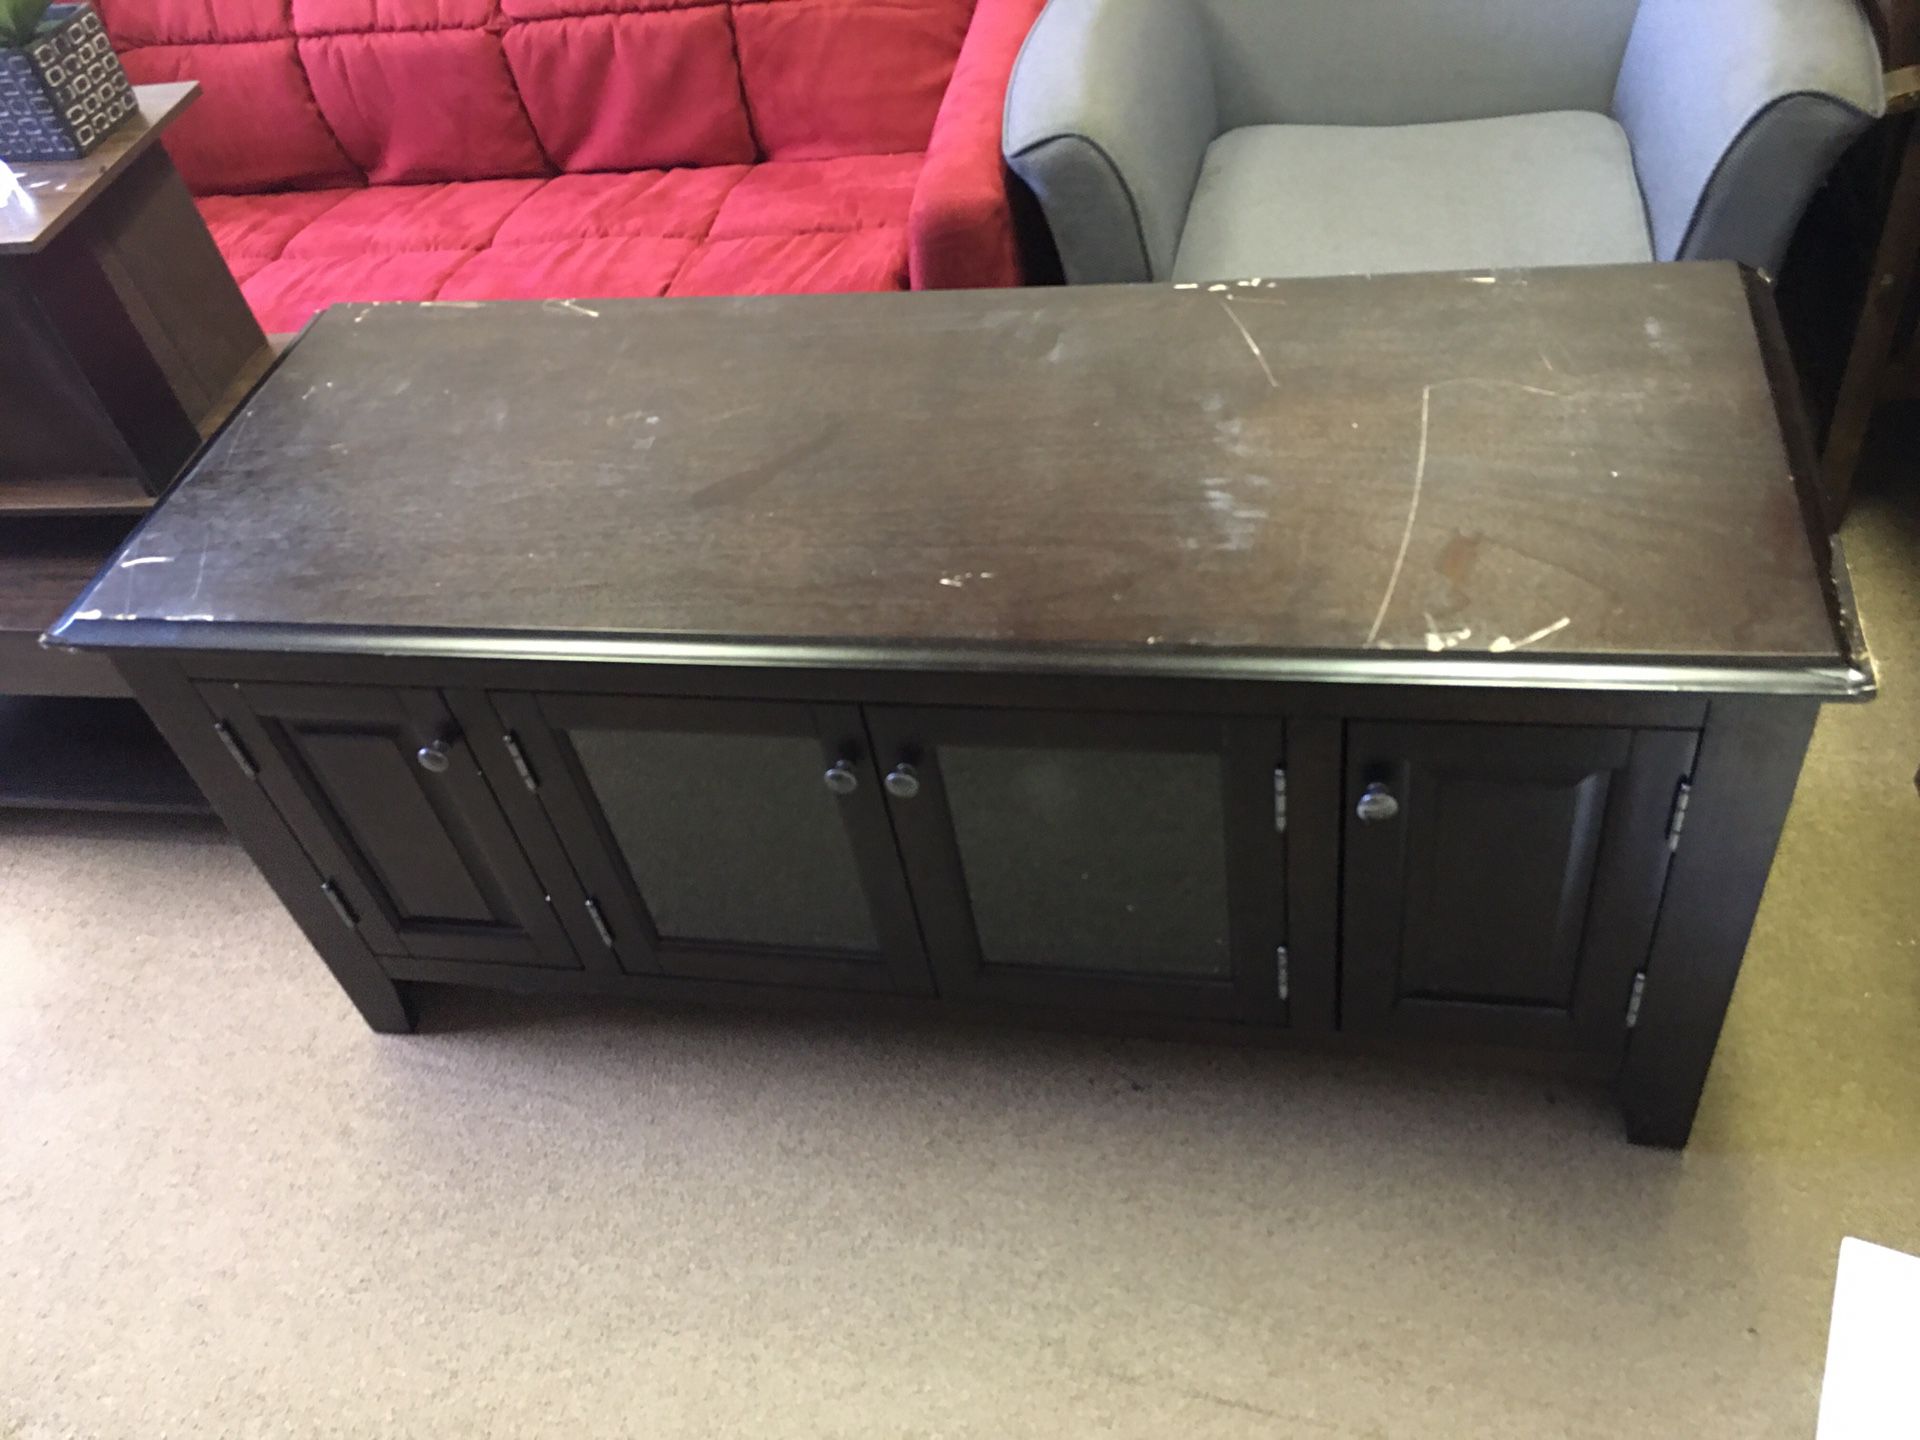 Insignia Tv stand on Sale $40 Come shop ZBD Warehouse